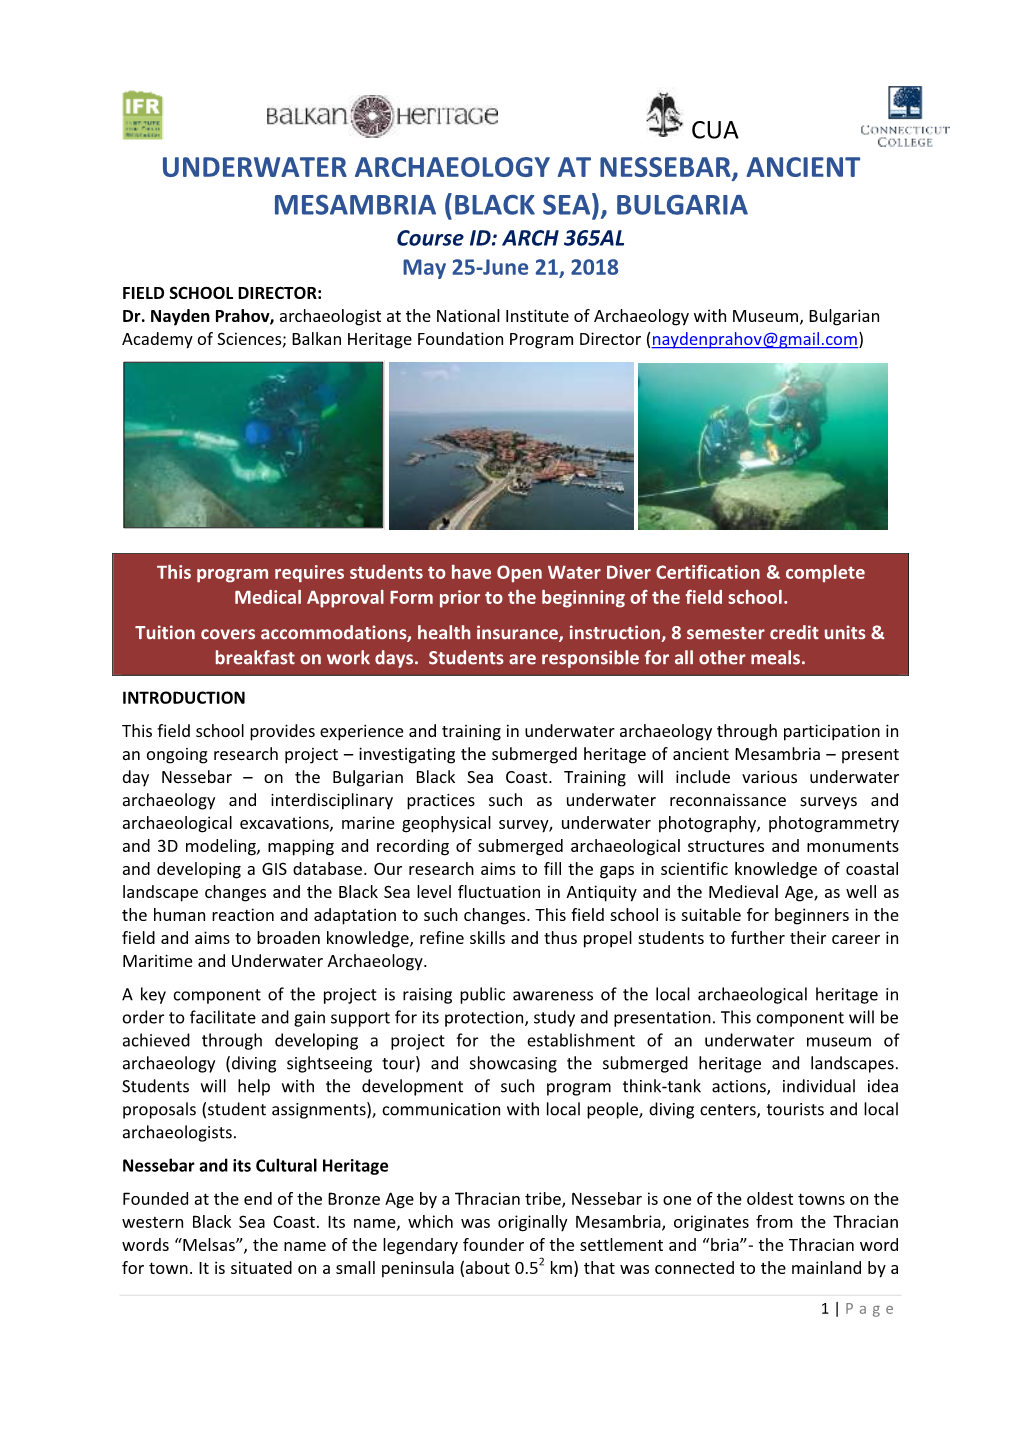 UNDERWATER ARCHAEOLOGY at NESSEBAR, ANCIENT MESAMBRIA (BLACK SEA), BULGARIA Course ID: ARCH 365AL May 25-June 21, 2018 FIELD SCHOOL DIRECTOR: Dr